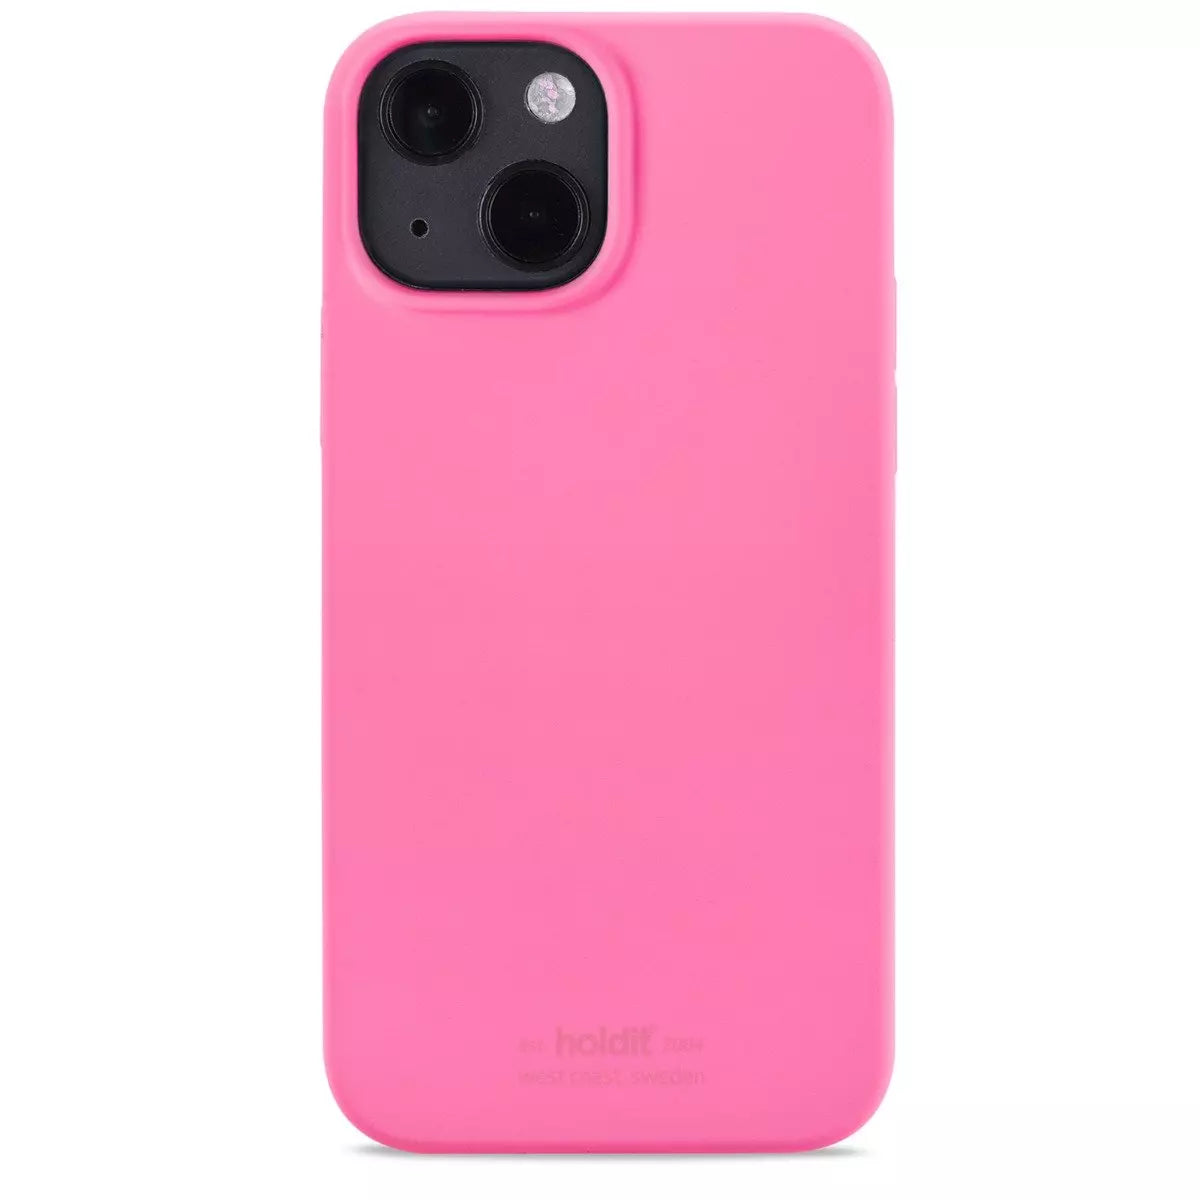 holdit iPhone 13 Soft Touch Silikone Cover